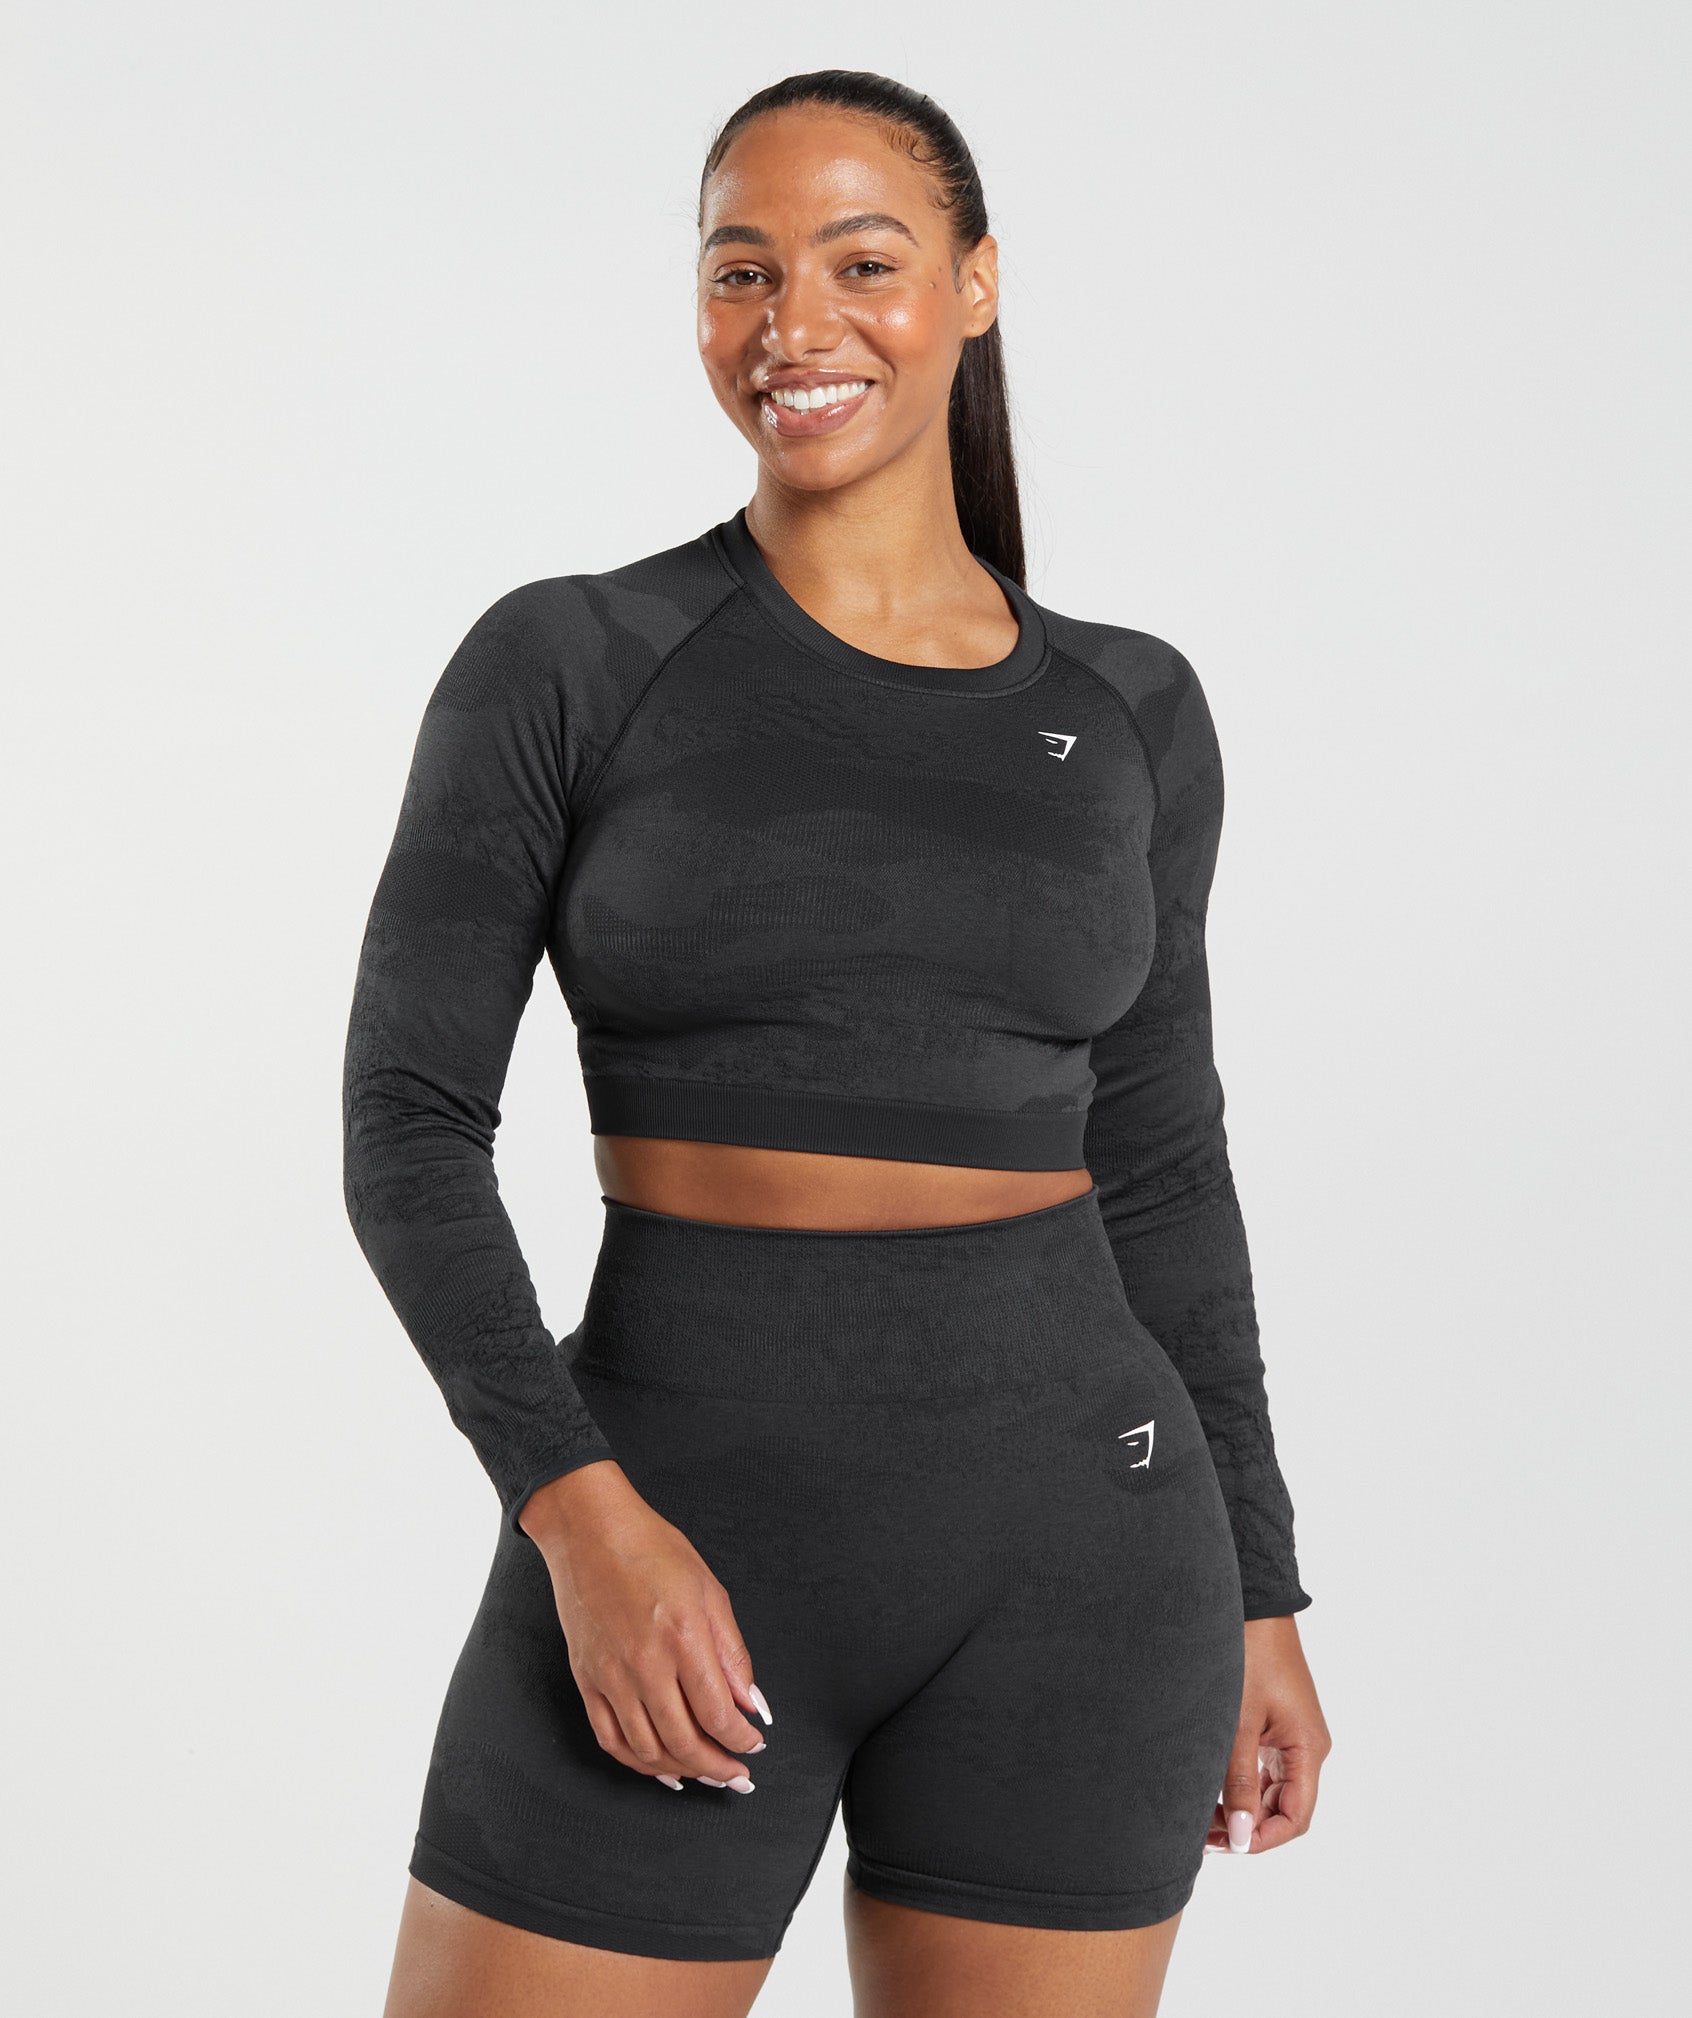 Adapt Camo Seamless Lace Up Back Top in Black/Onyx Grey - view 2